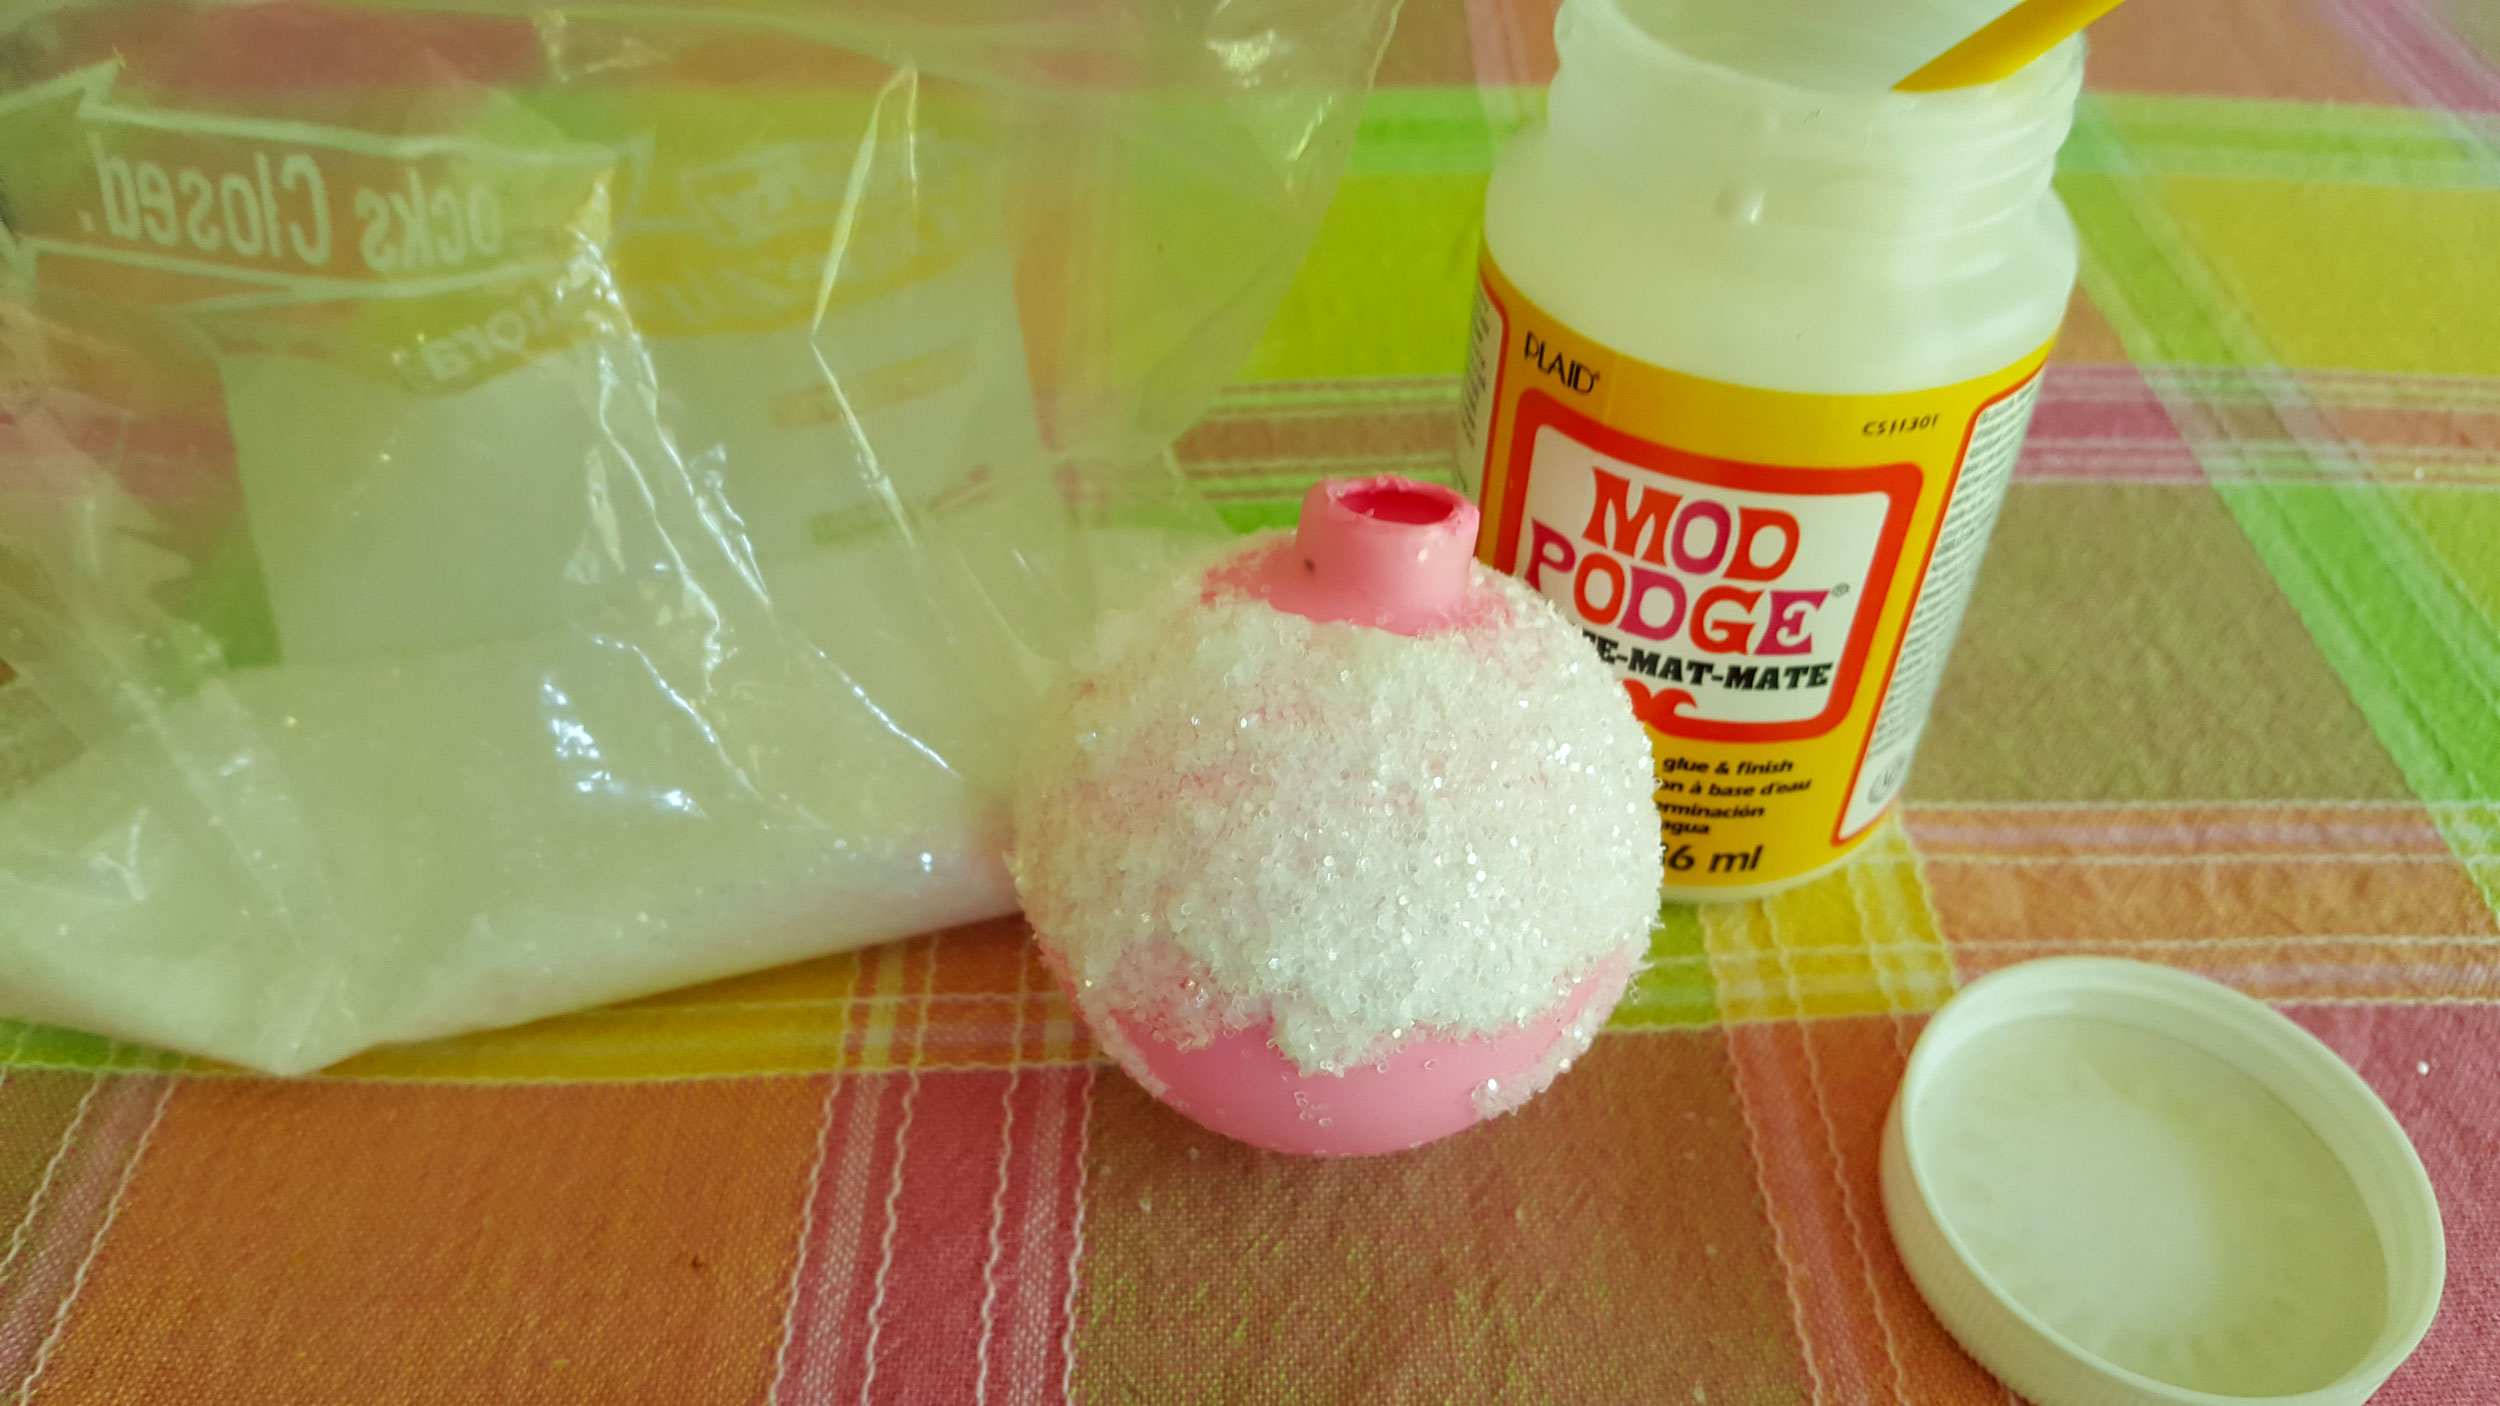 Step 5 is to use Modge Podge to coat the top of the glass ball to look like frosting, then shake glitter on it. | OrnamentShop.com